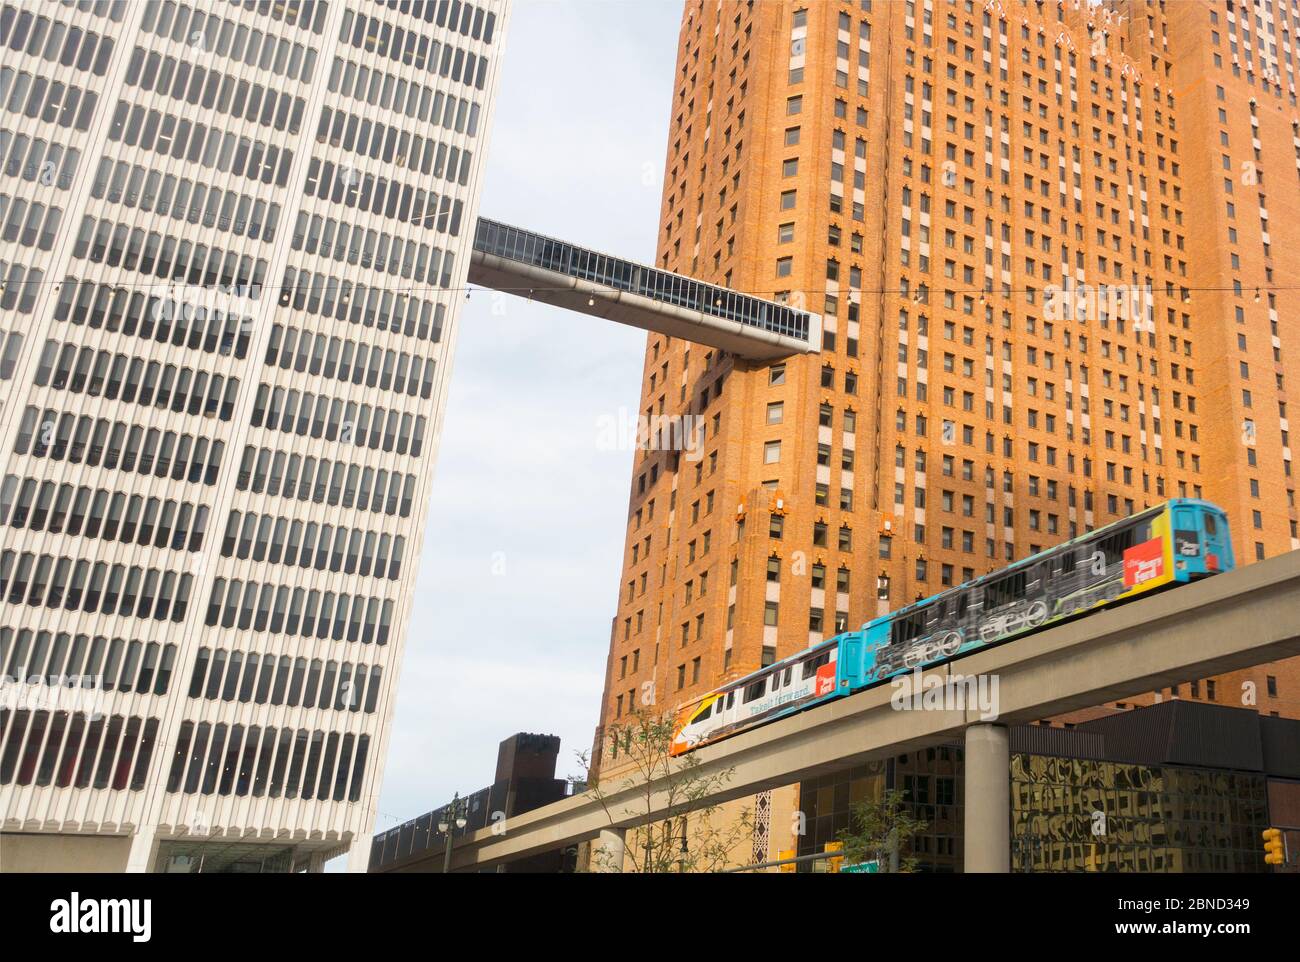 people mover train in downtown Detroit Michigan Stock Photo